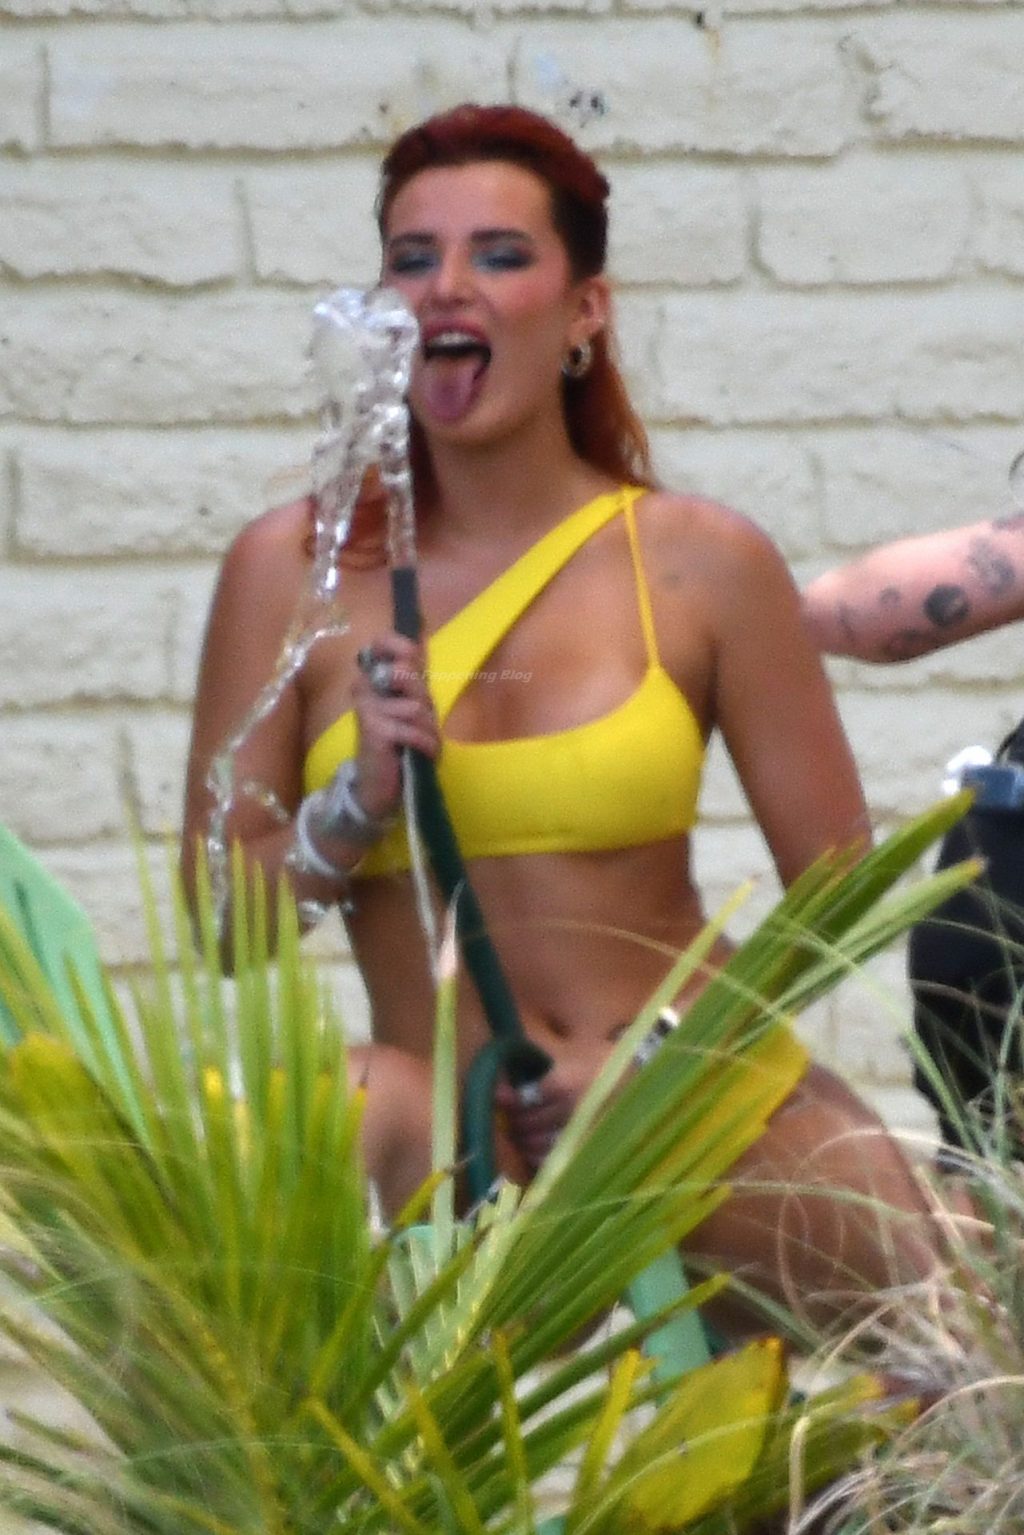 Bella Thorne Poses Seductively with a Water Hose During a Shoot in Miami (80 Photos)